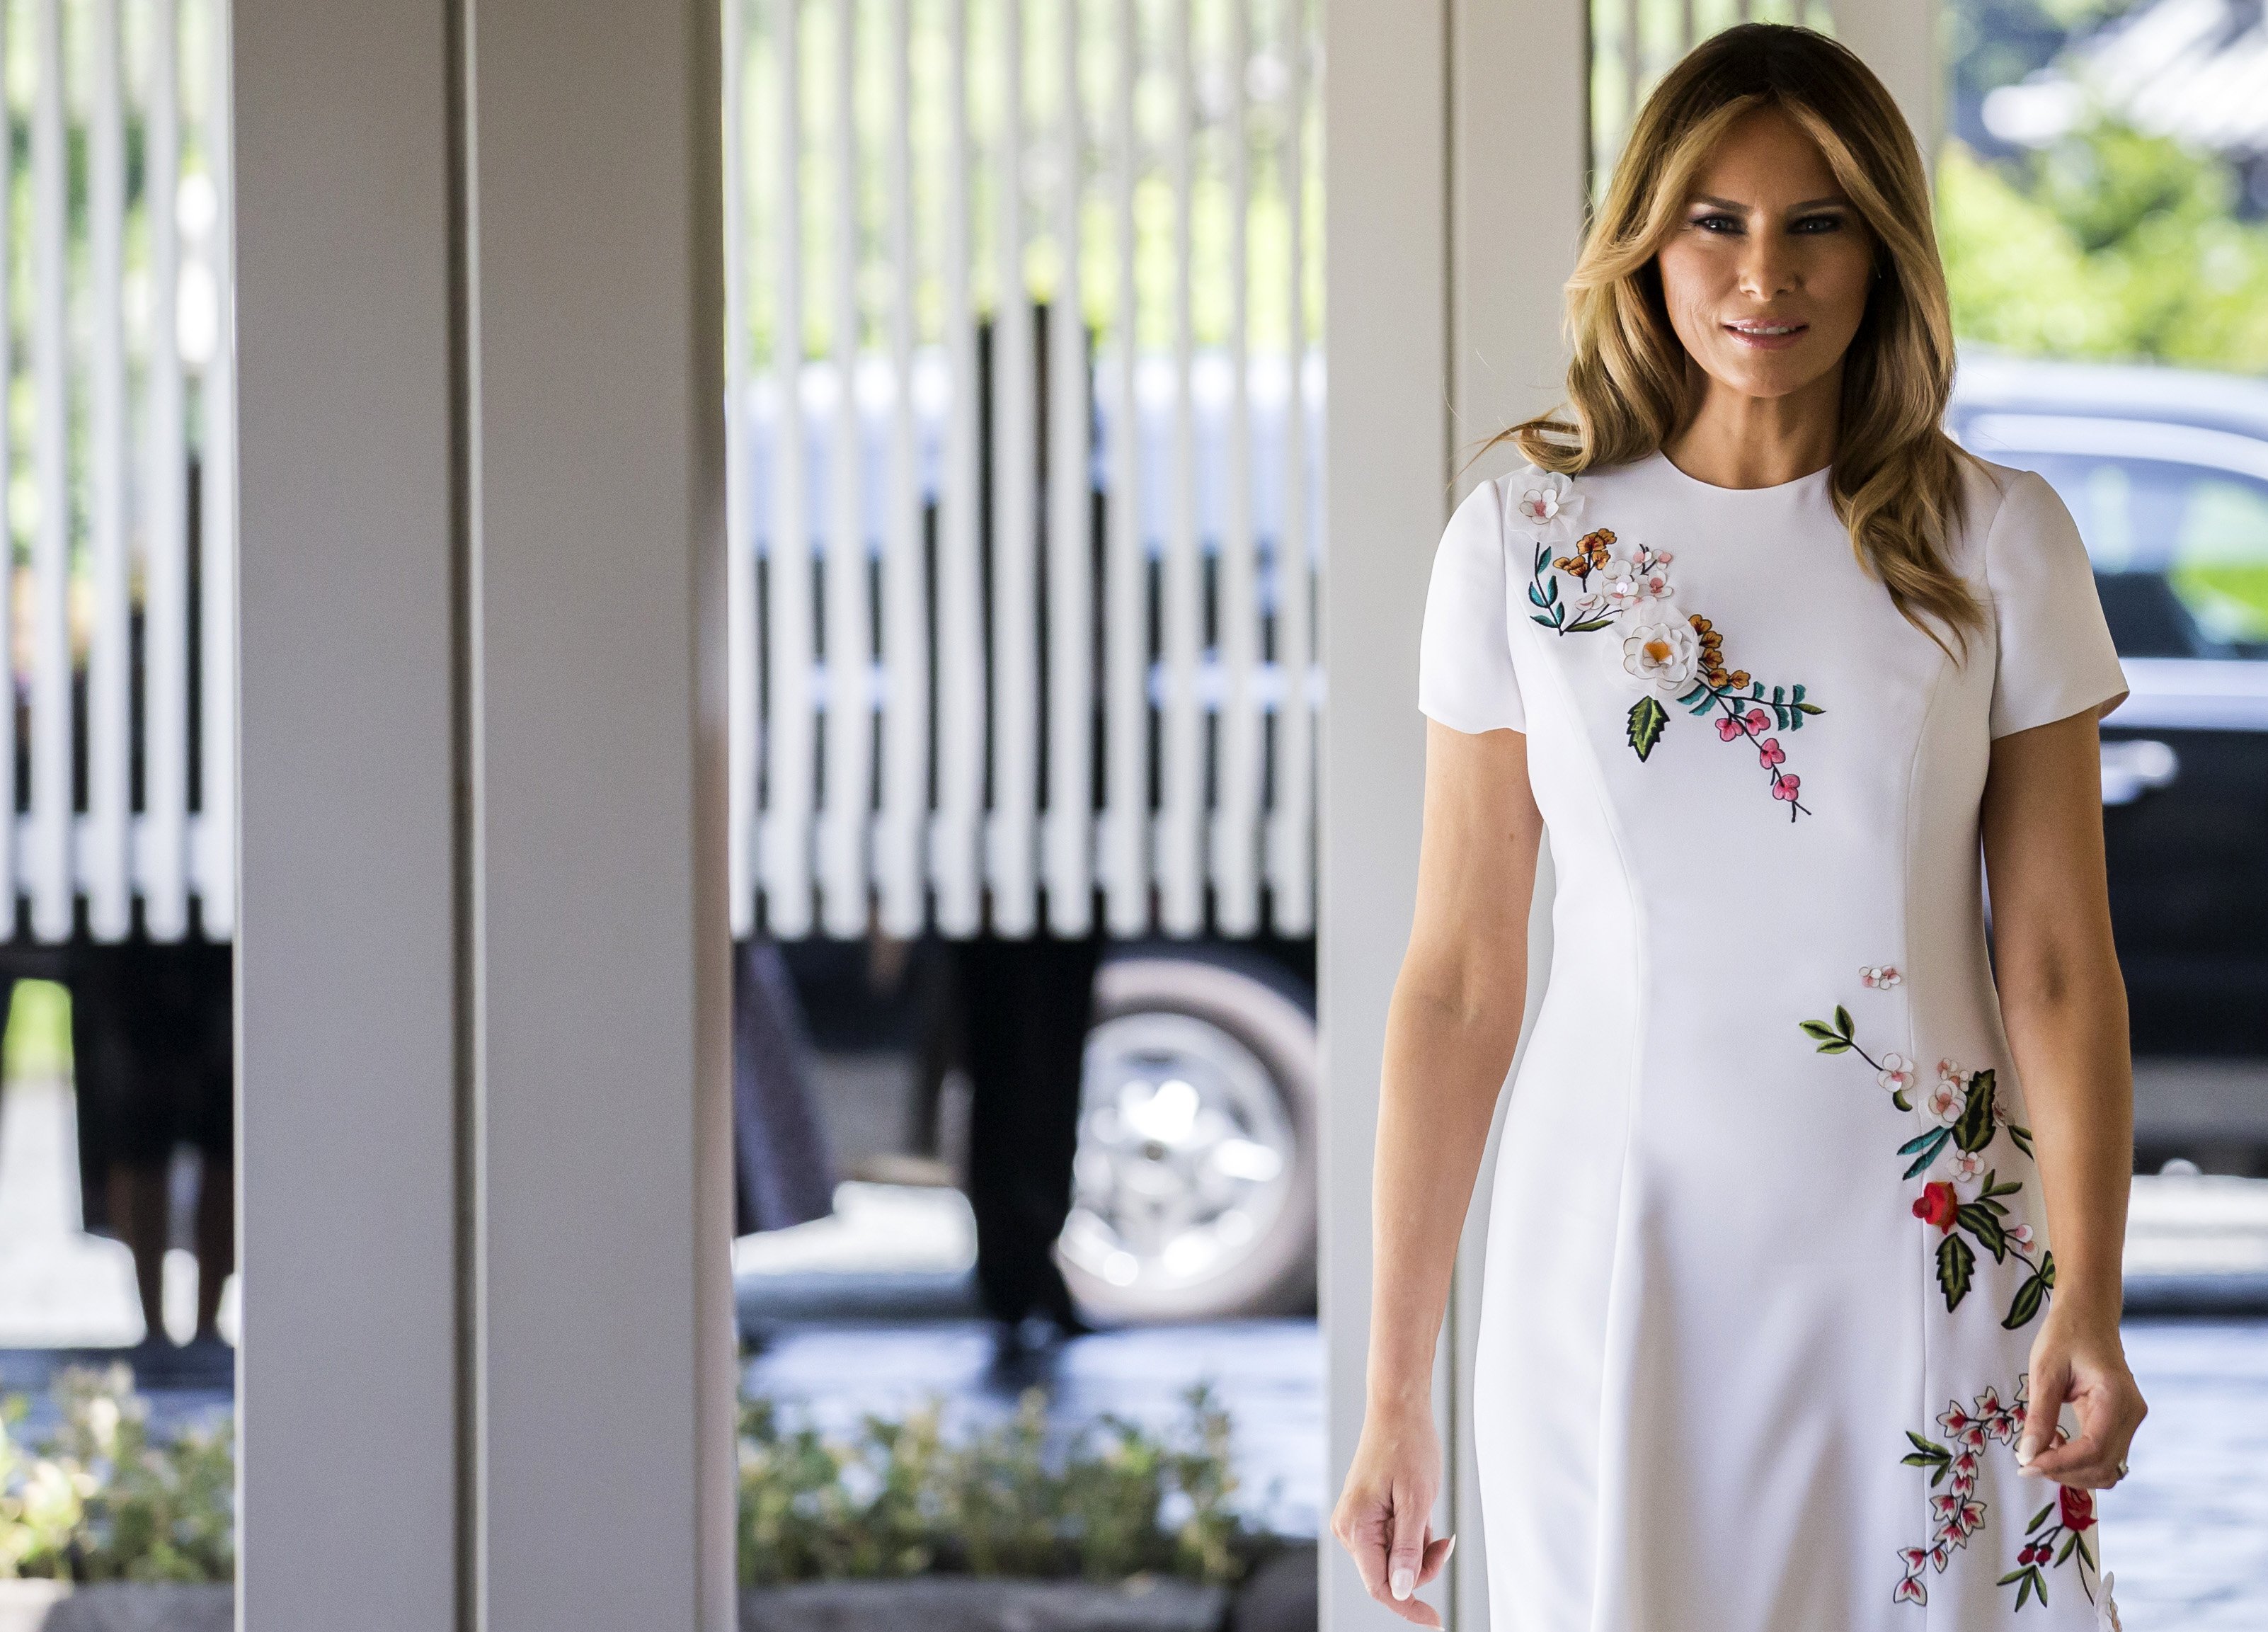 Melania Trump inside the State Guest House on May 27, 2019, in Tokyo, Japan. | Source: Getty Images.